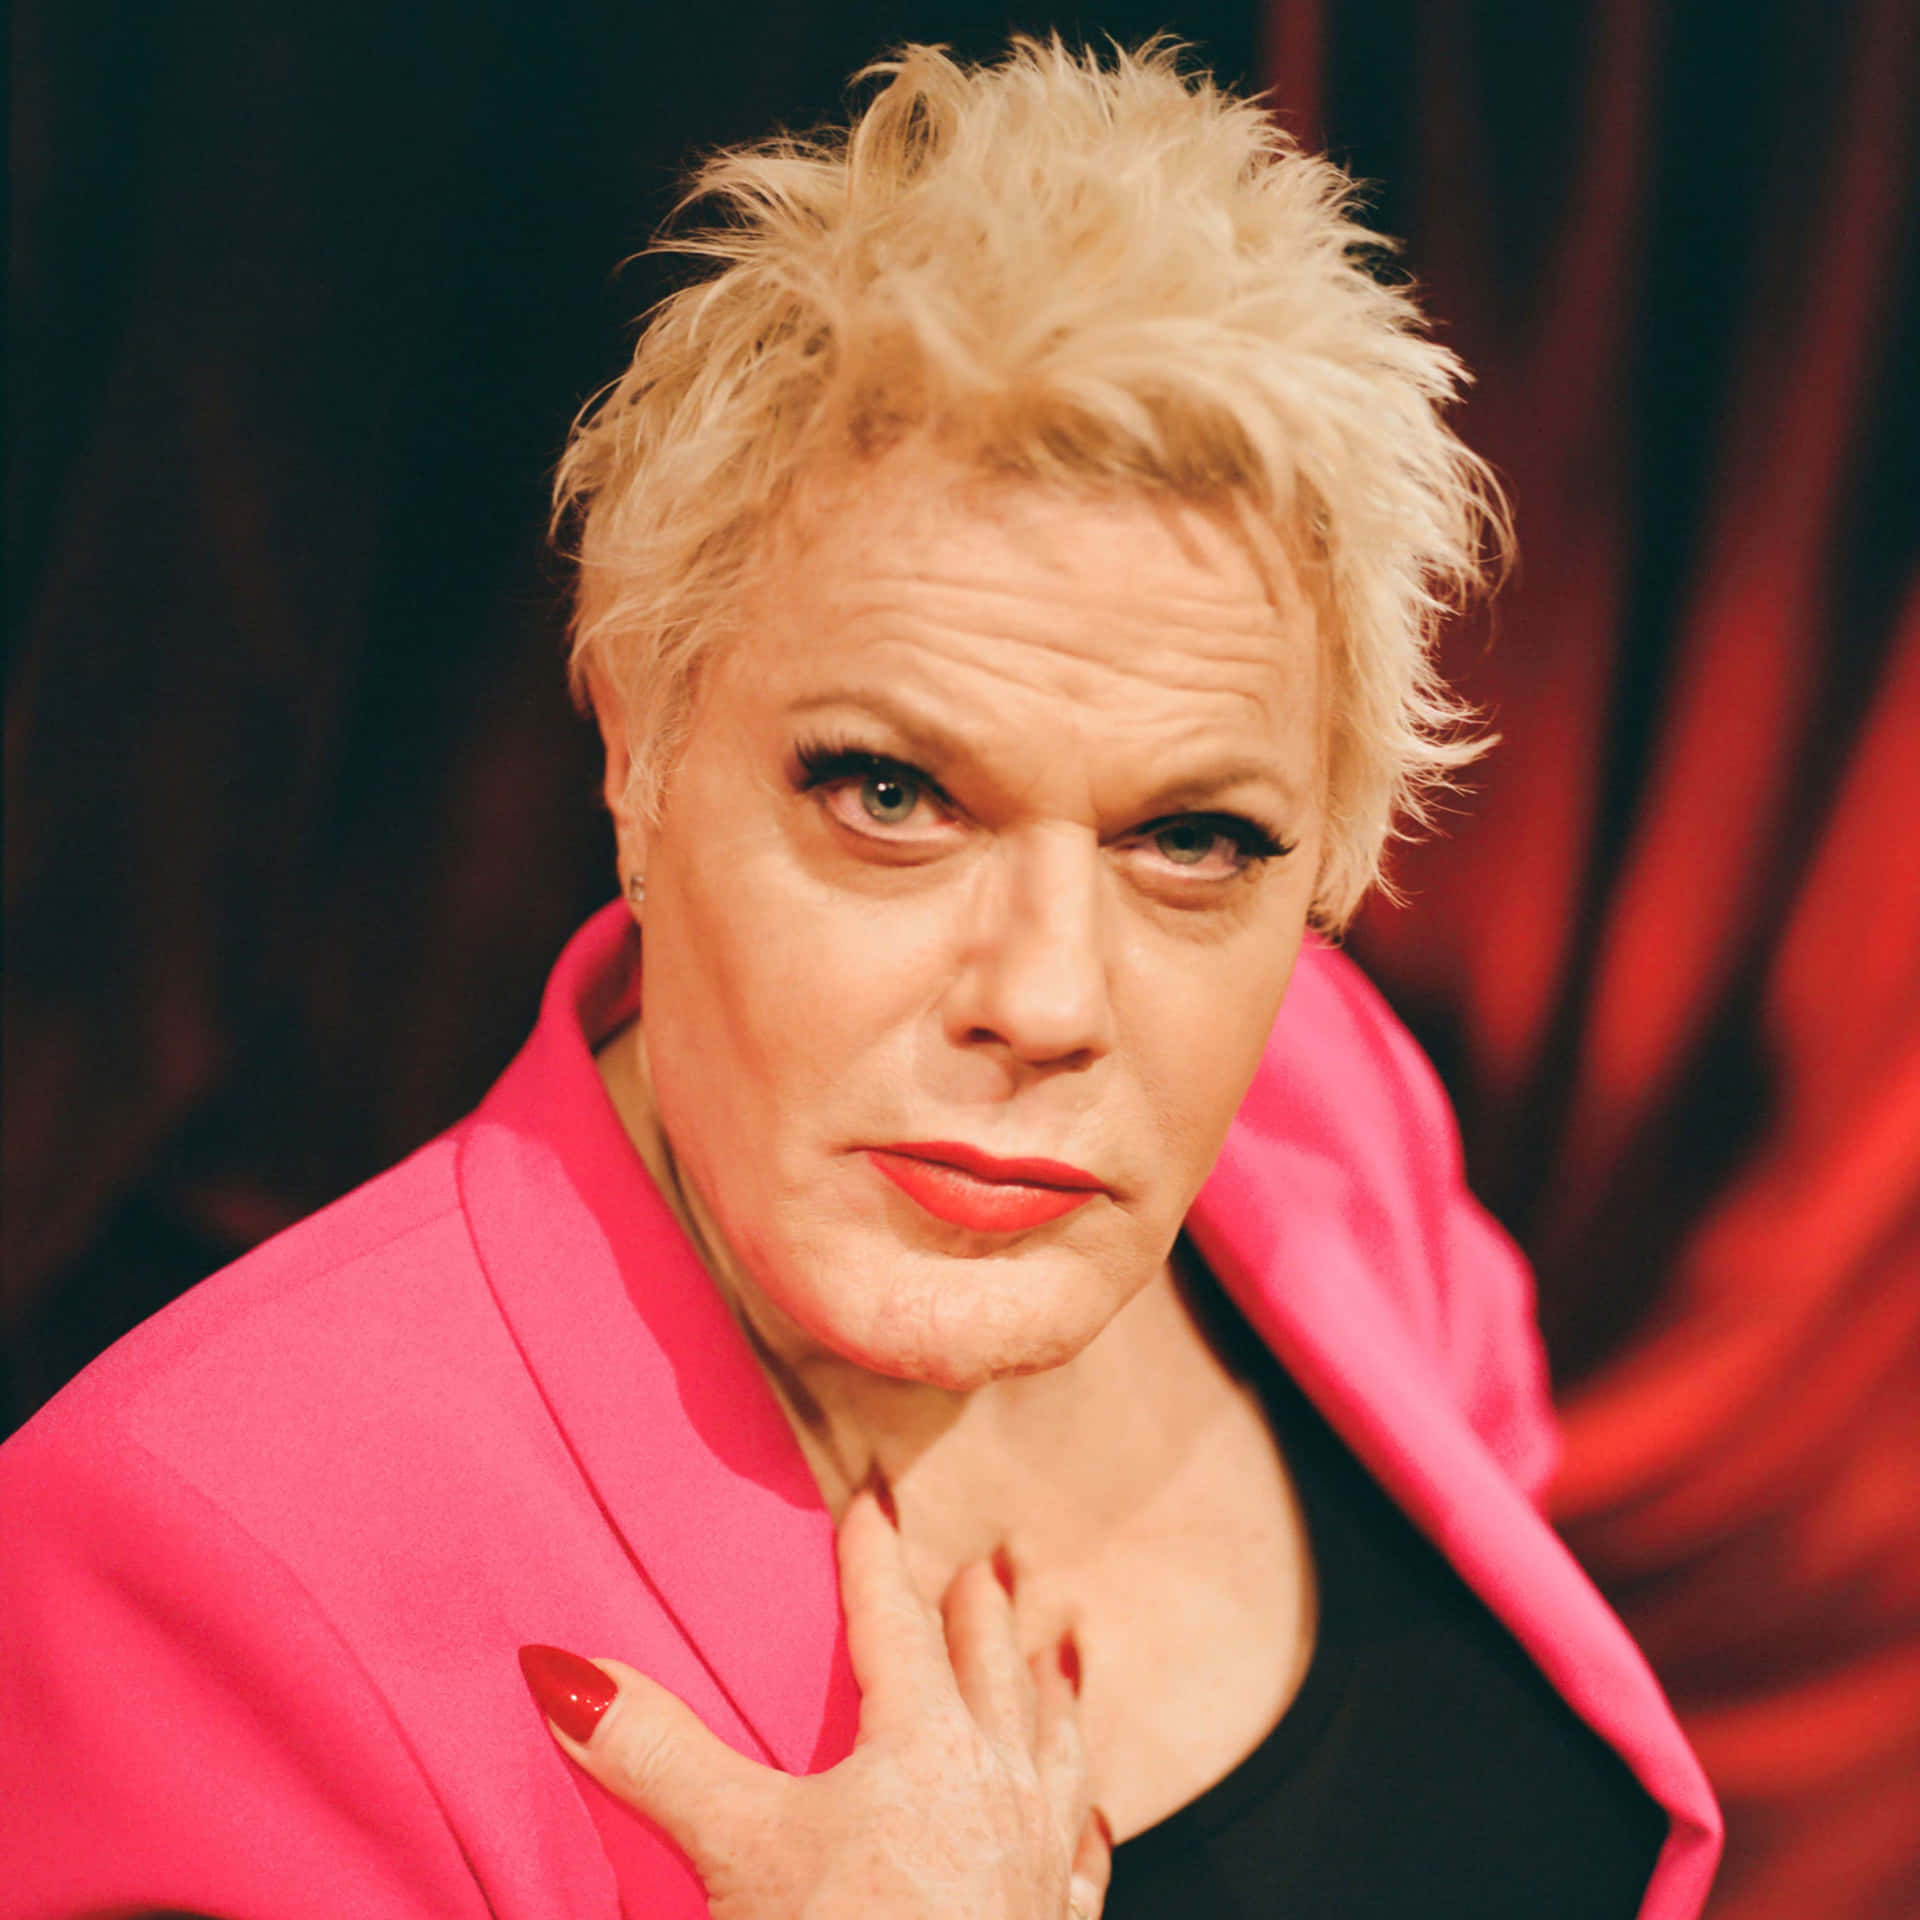 Eddie Izzard confidently posing for a photoshoot Wallpaper